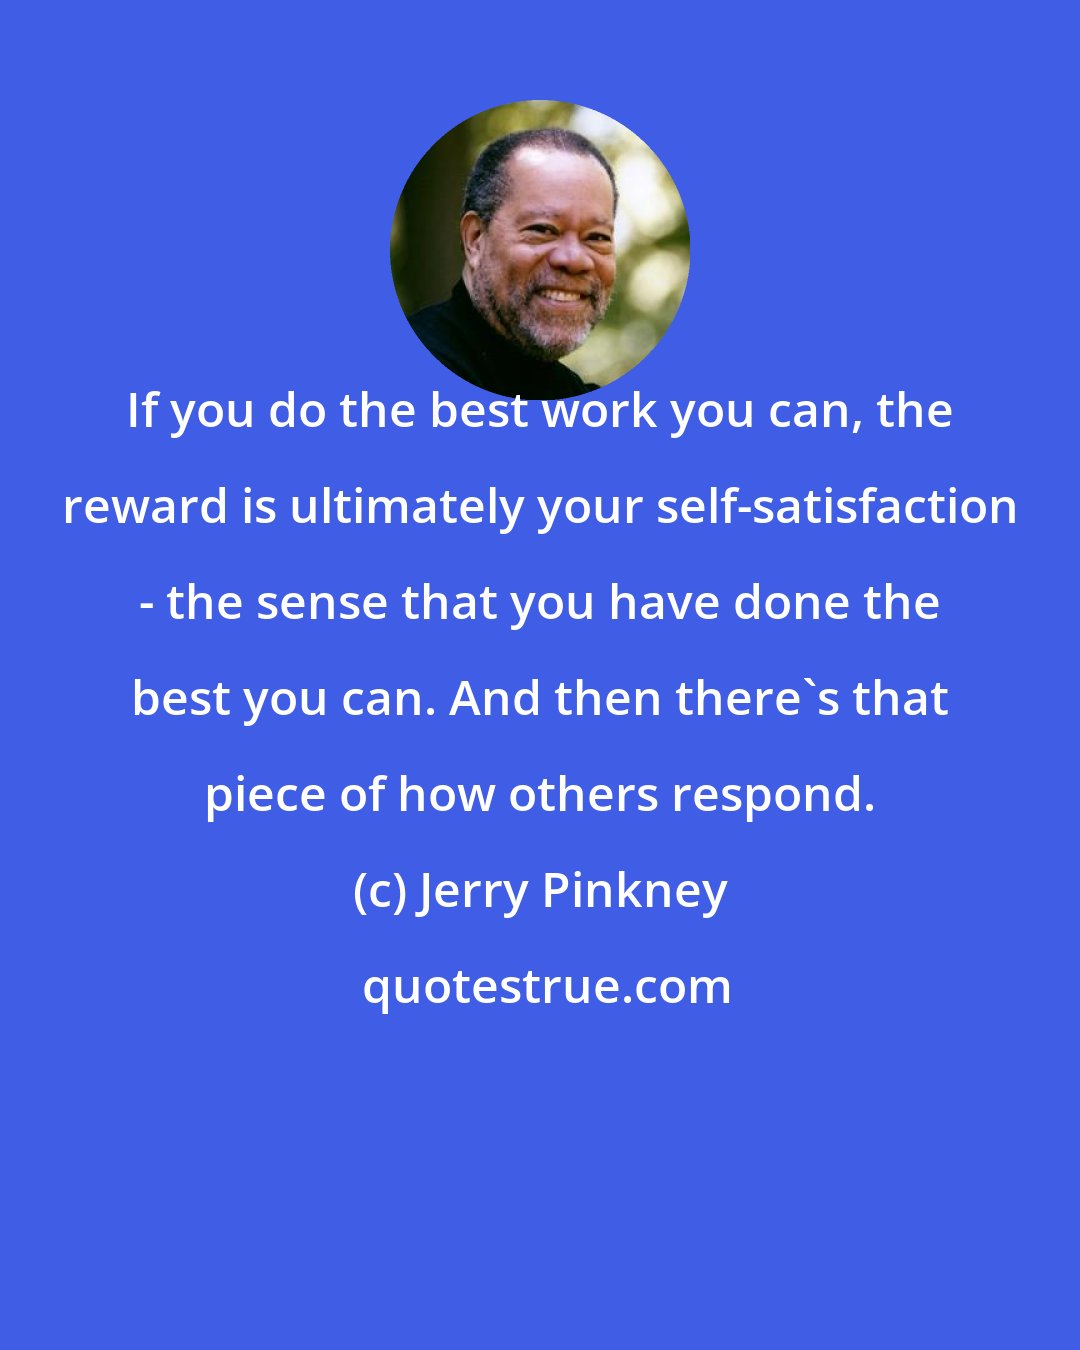 Jerry Pinkney: If you do the best work you can, the reward is ultimately your self-satisfaction - the sense that you have done the best you can. And then there's that piece of how others respond.